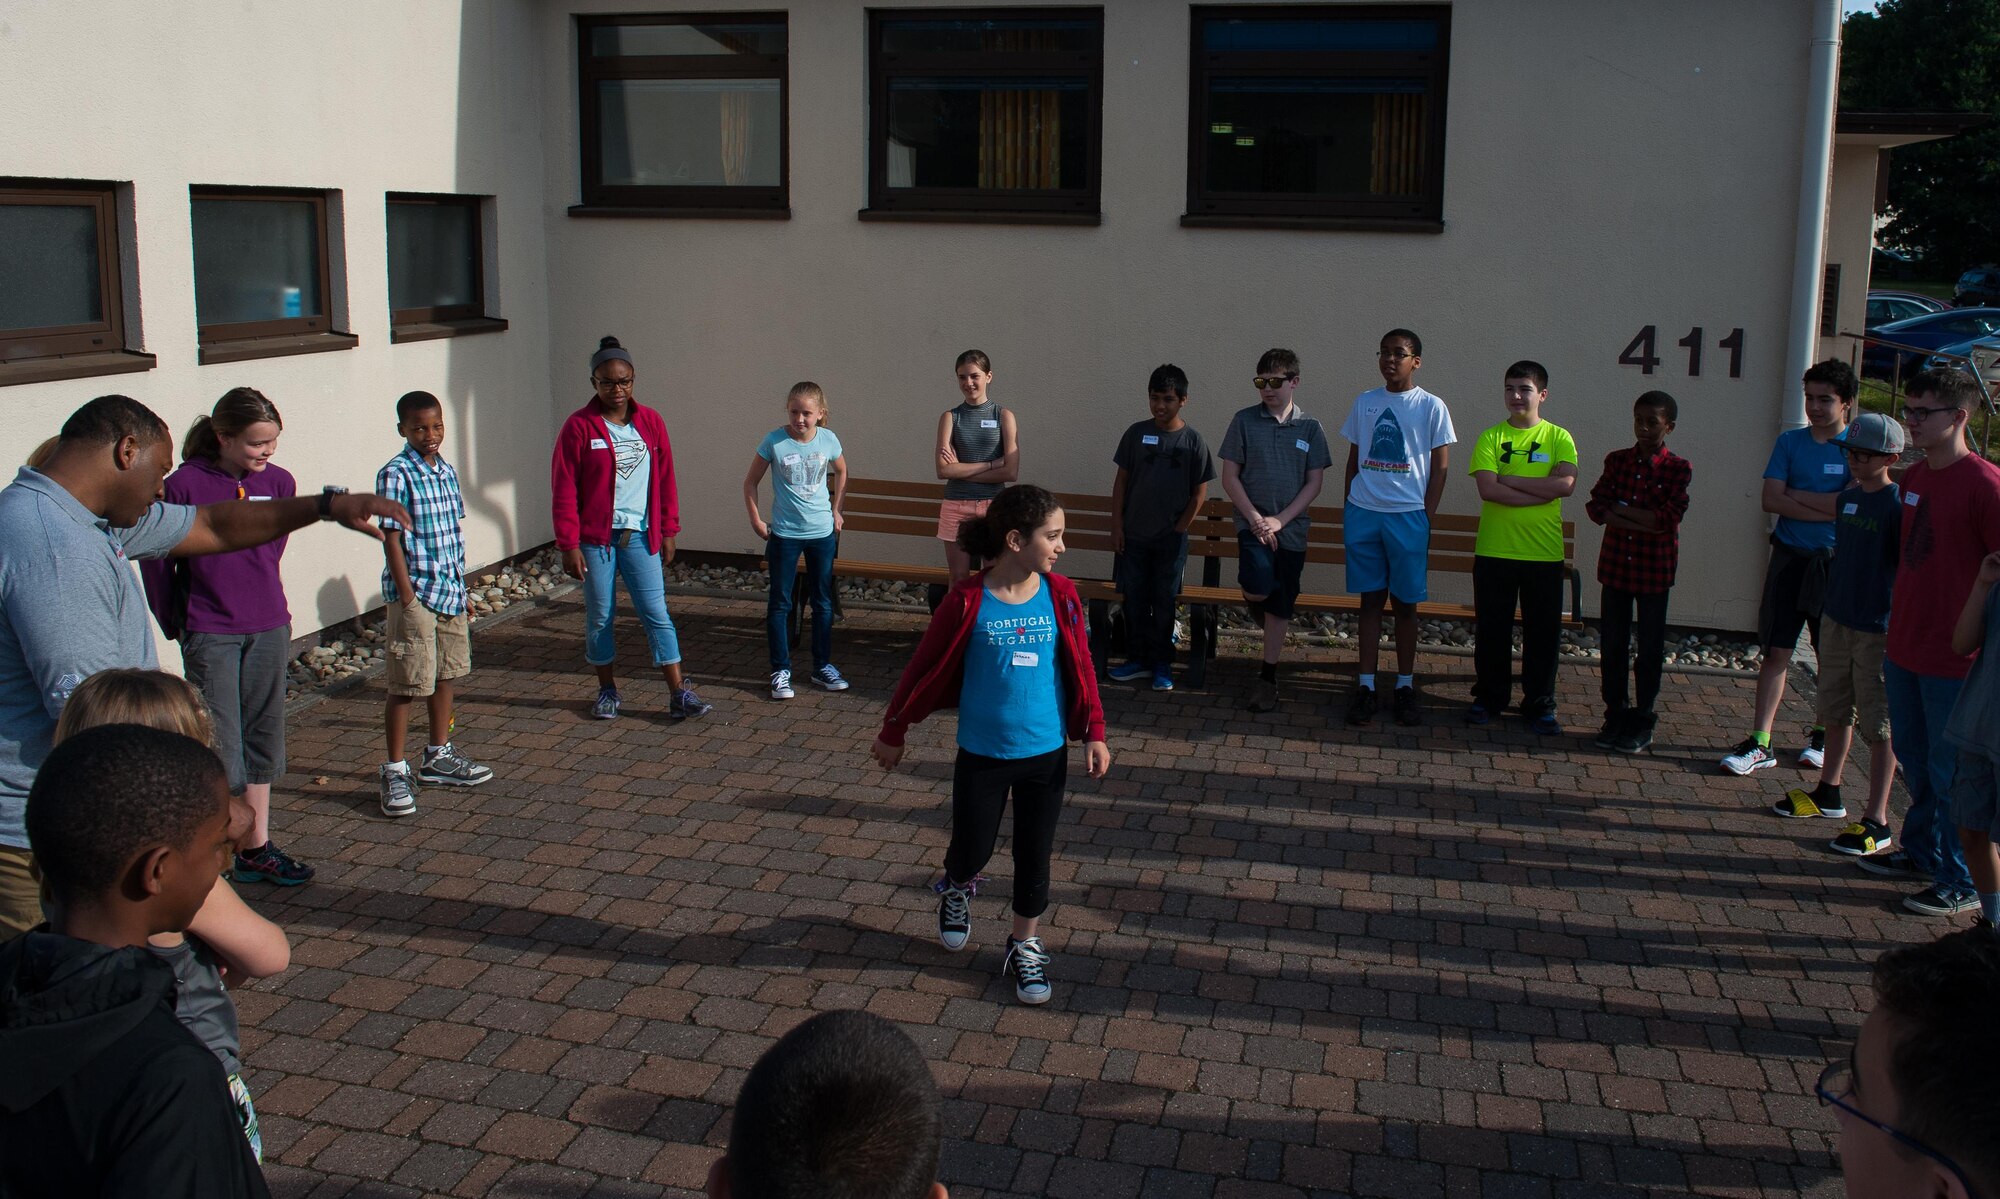 A child participates in “Bumpity bump bump,” a game that is designed to help its participants get to know each other, during a Science, Technology, Engineering and Mathematics youth camp July 11, 2016, at Ramstein Air Base, Germany. The game’s premise is to have kids learn the name of the peer next to them in the circle, and if they can’t remember it in time, they must be in the middle. This was one of several activities the children took part in the beginning of the youth camp to get familiar with one another.